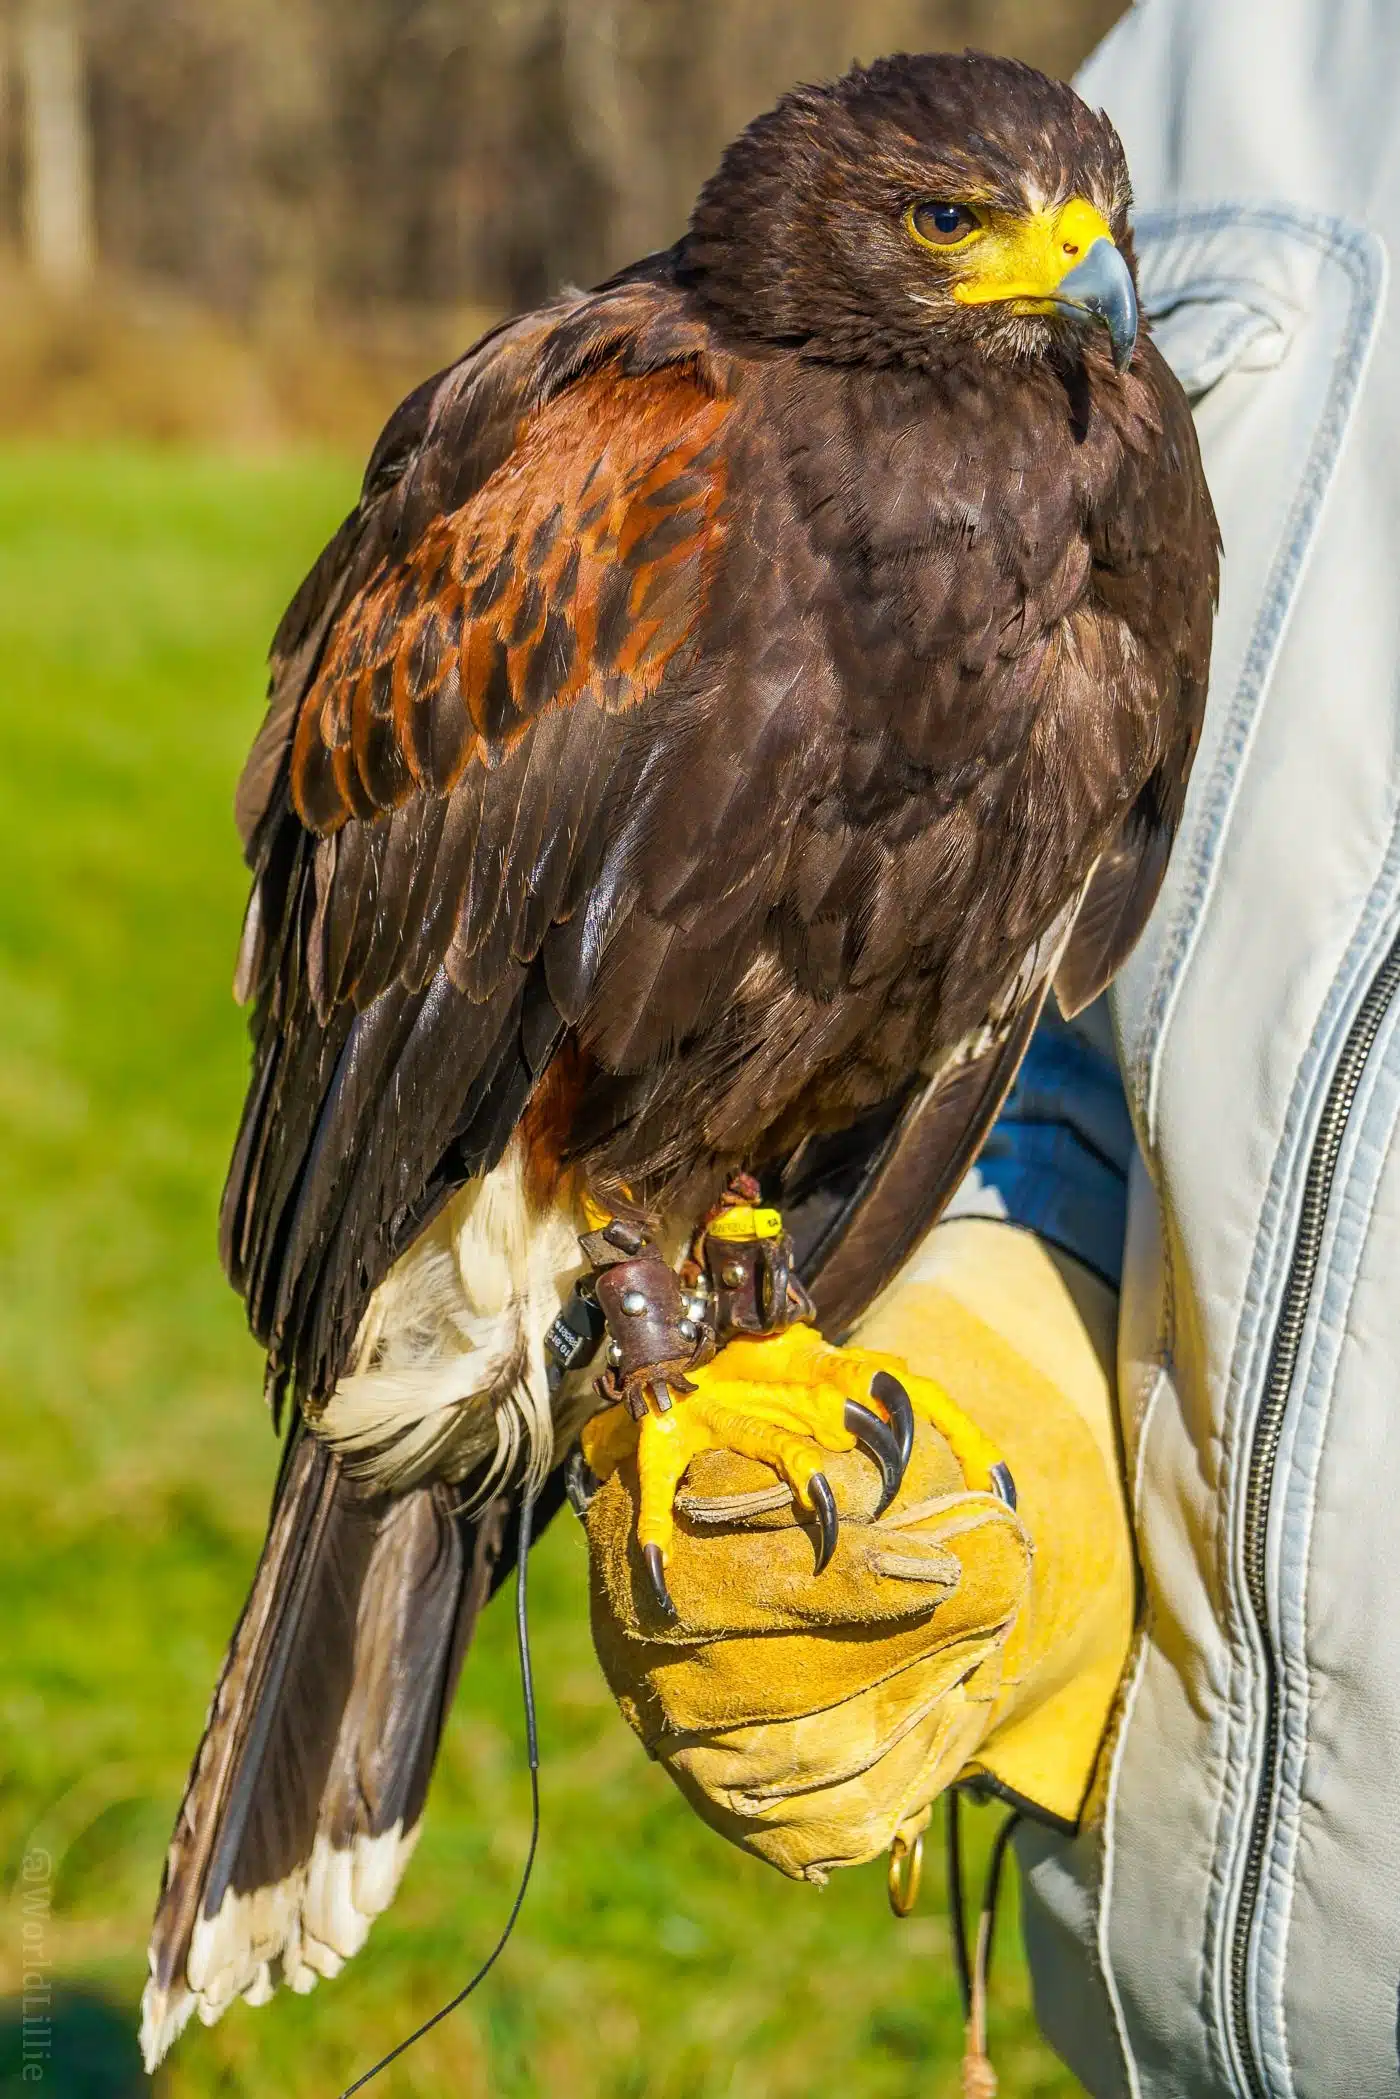 A Harris's Hawk! For a romantic New England getaway, or family travel fun, Woodstock, VT is a charming small town: Covered bridges, Billings Farm, Vermont skiing, and falconry!